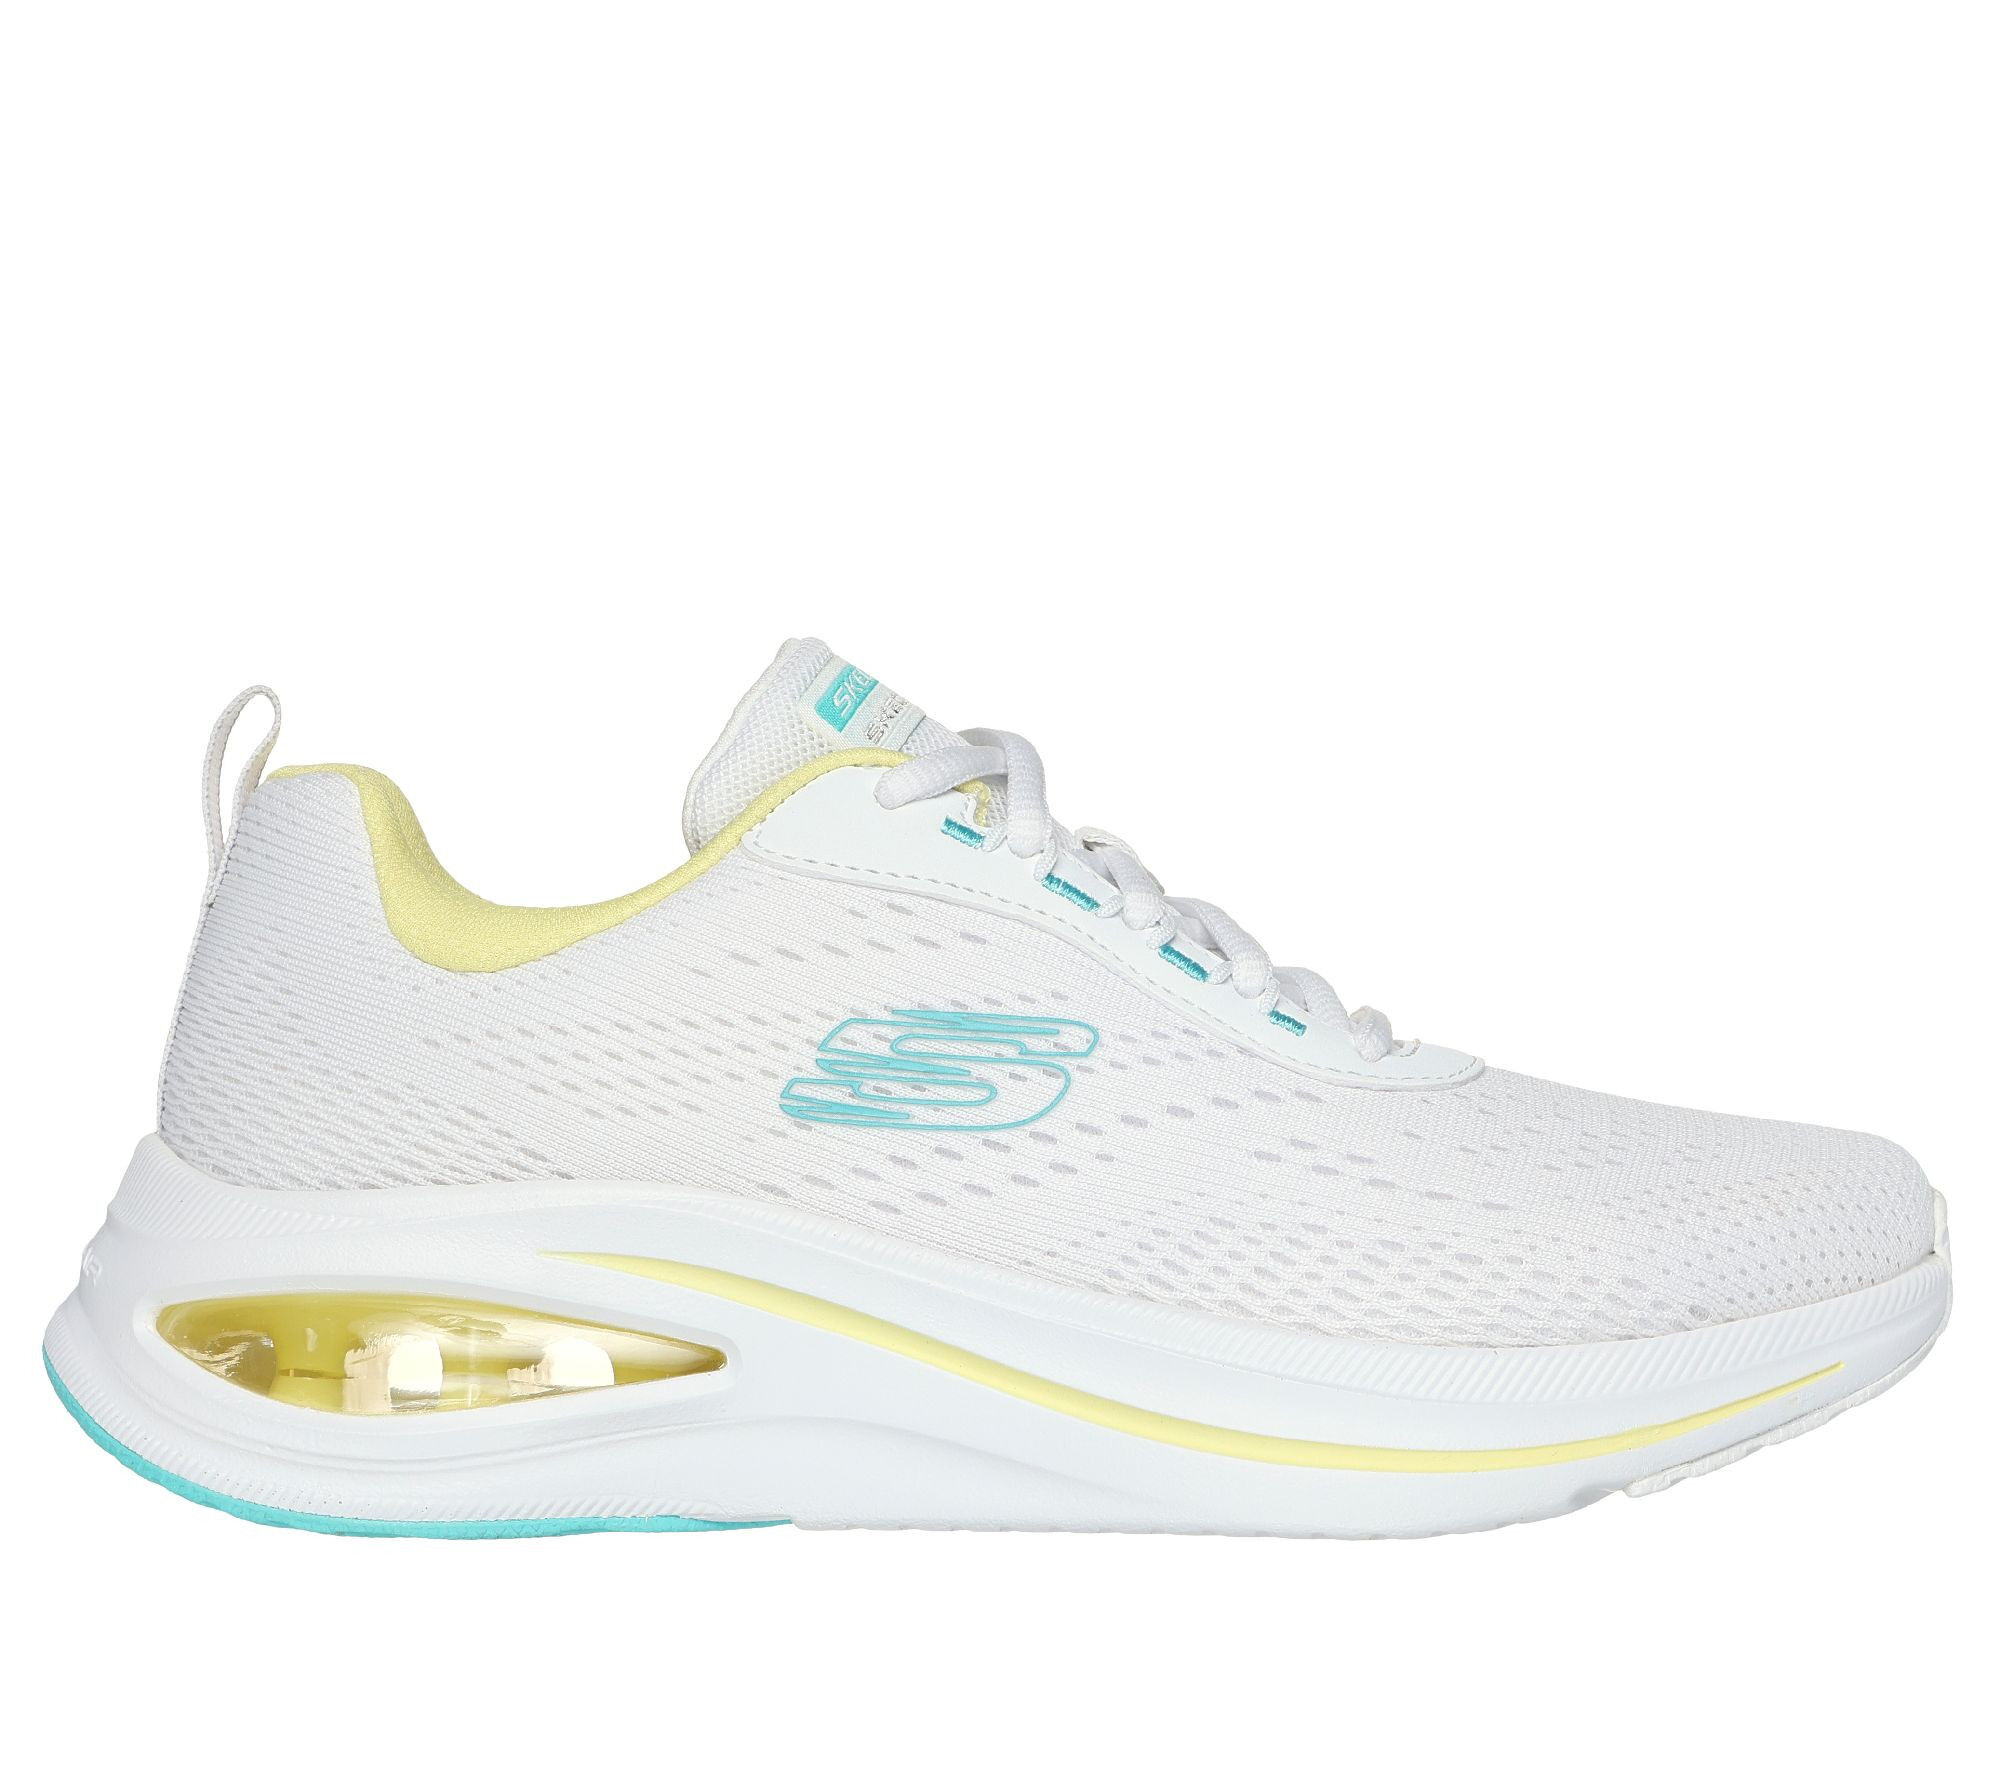 Skechers Skech-Air Meta - Aired Out - Lifestyle shoes - Women's | Hardloop